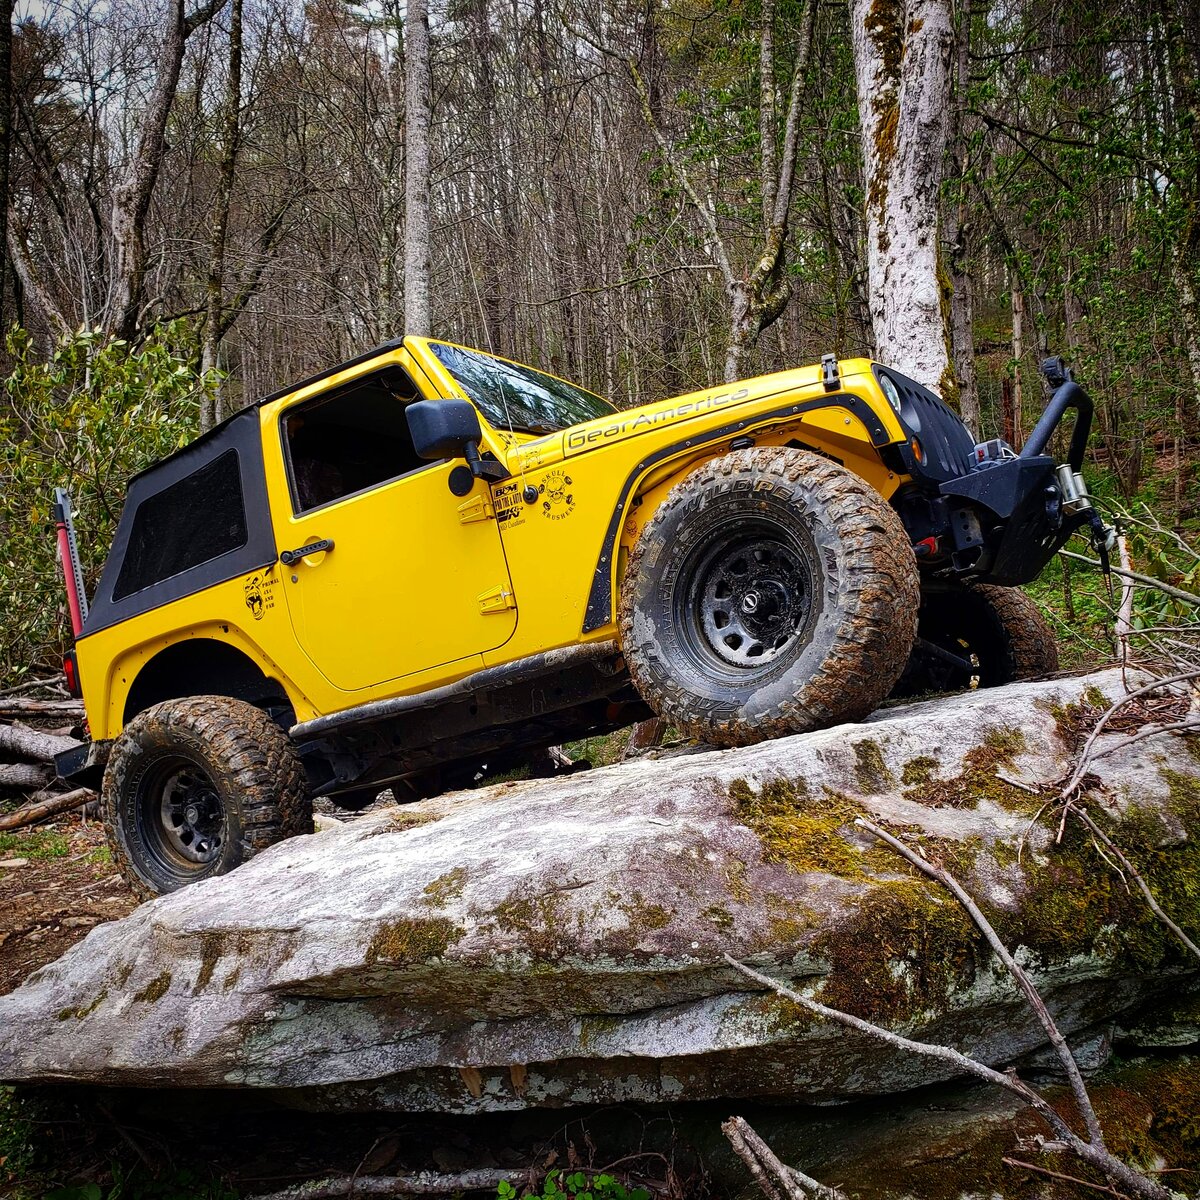 New to the forum: here's my ride | Jeep Wrangler JK Forum